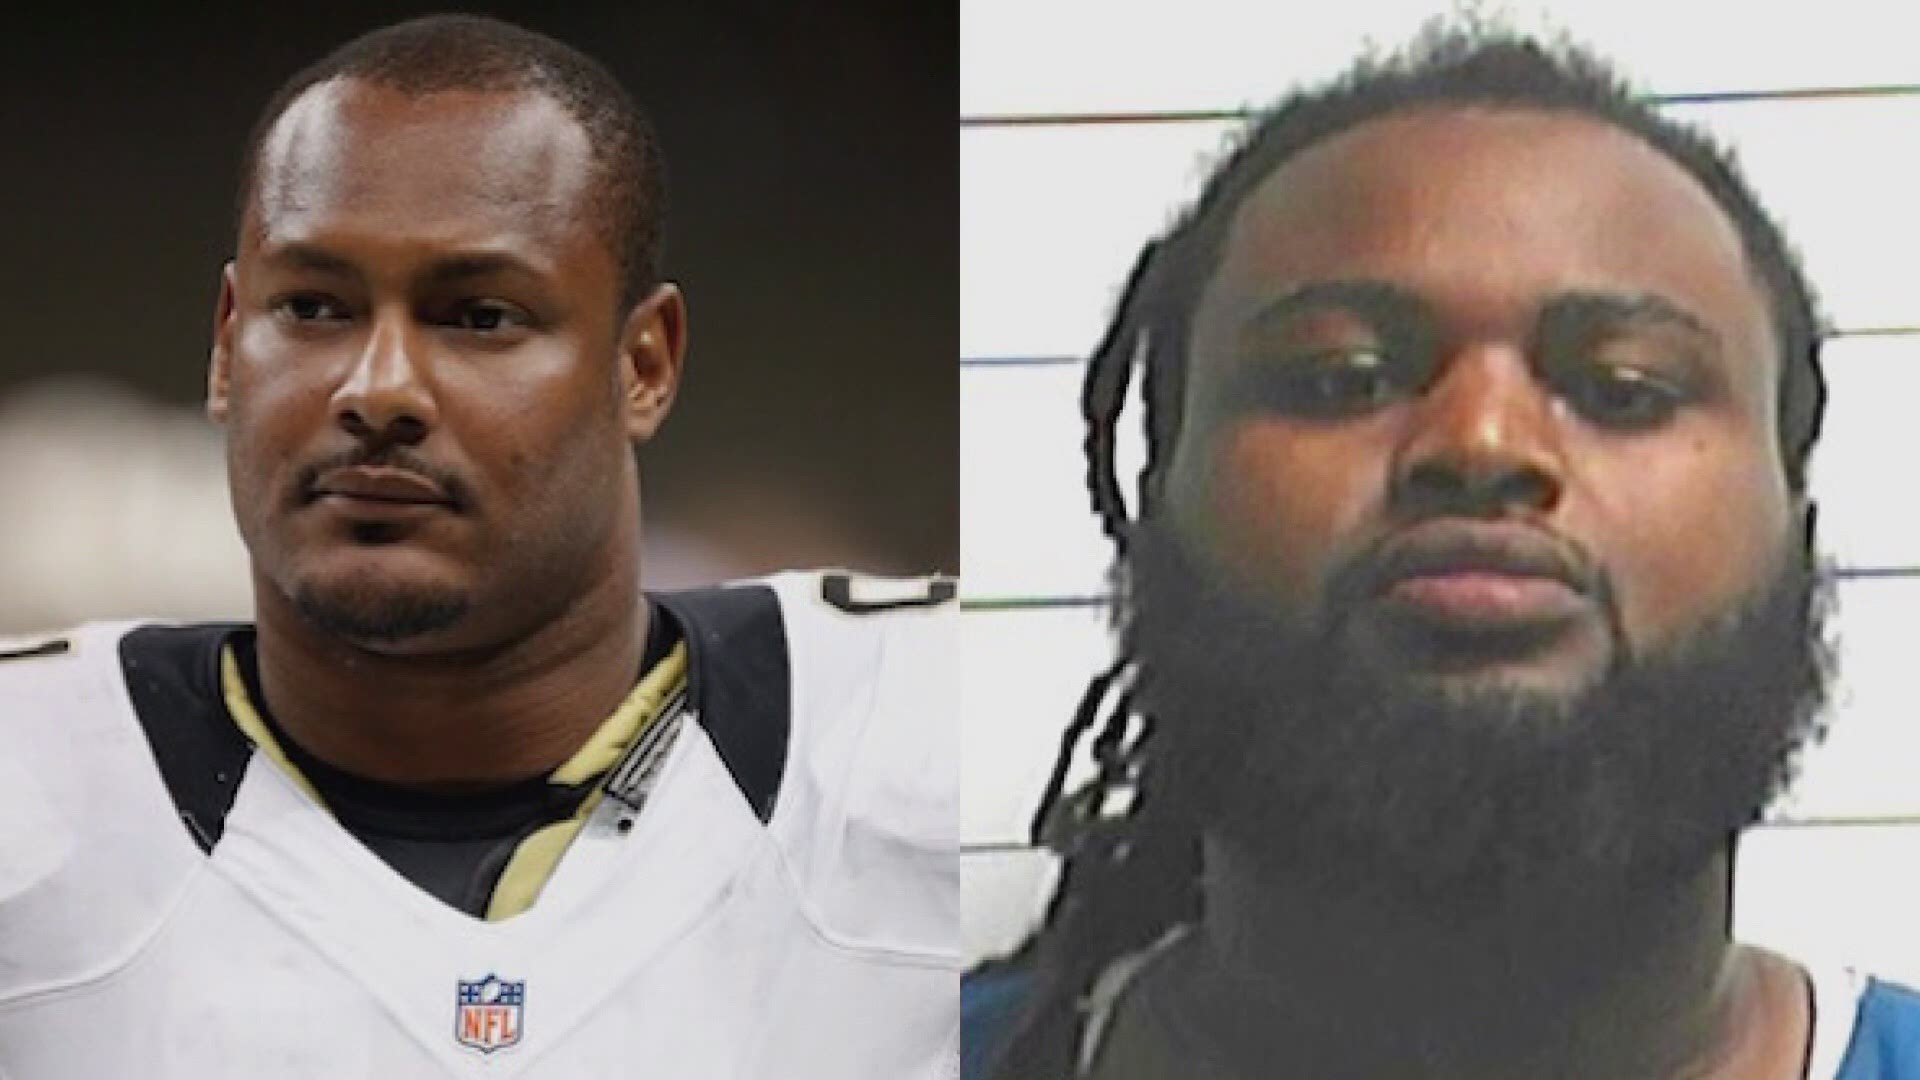 Hayes admitted to shooting and killing Saints Defensive End Will Smith in 2016 during a road rage-fueled confrontation in the Lower Garden District.